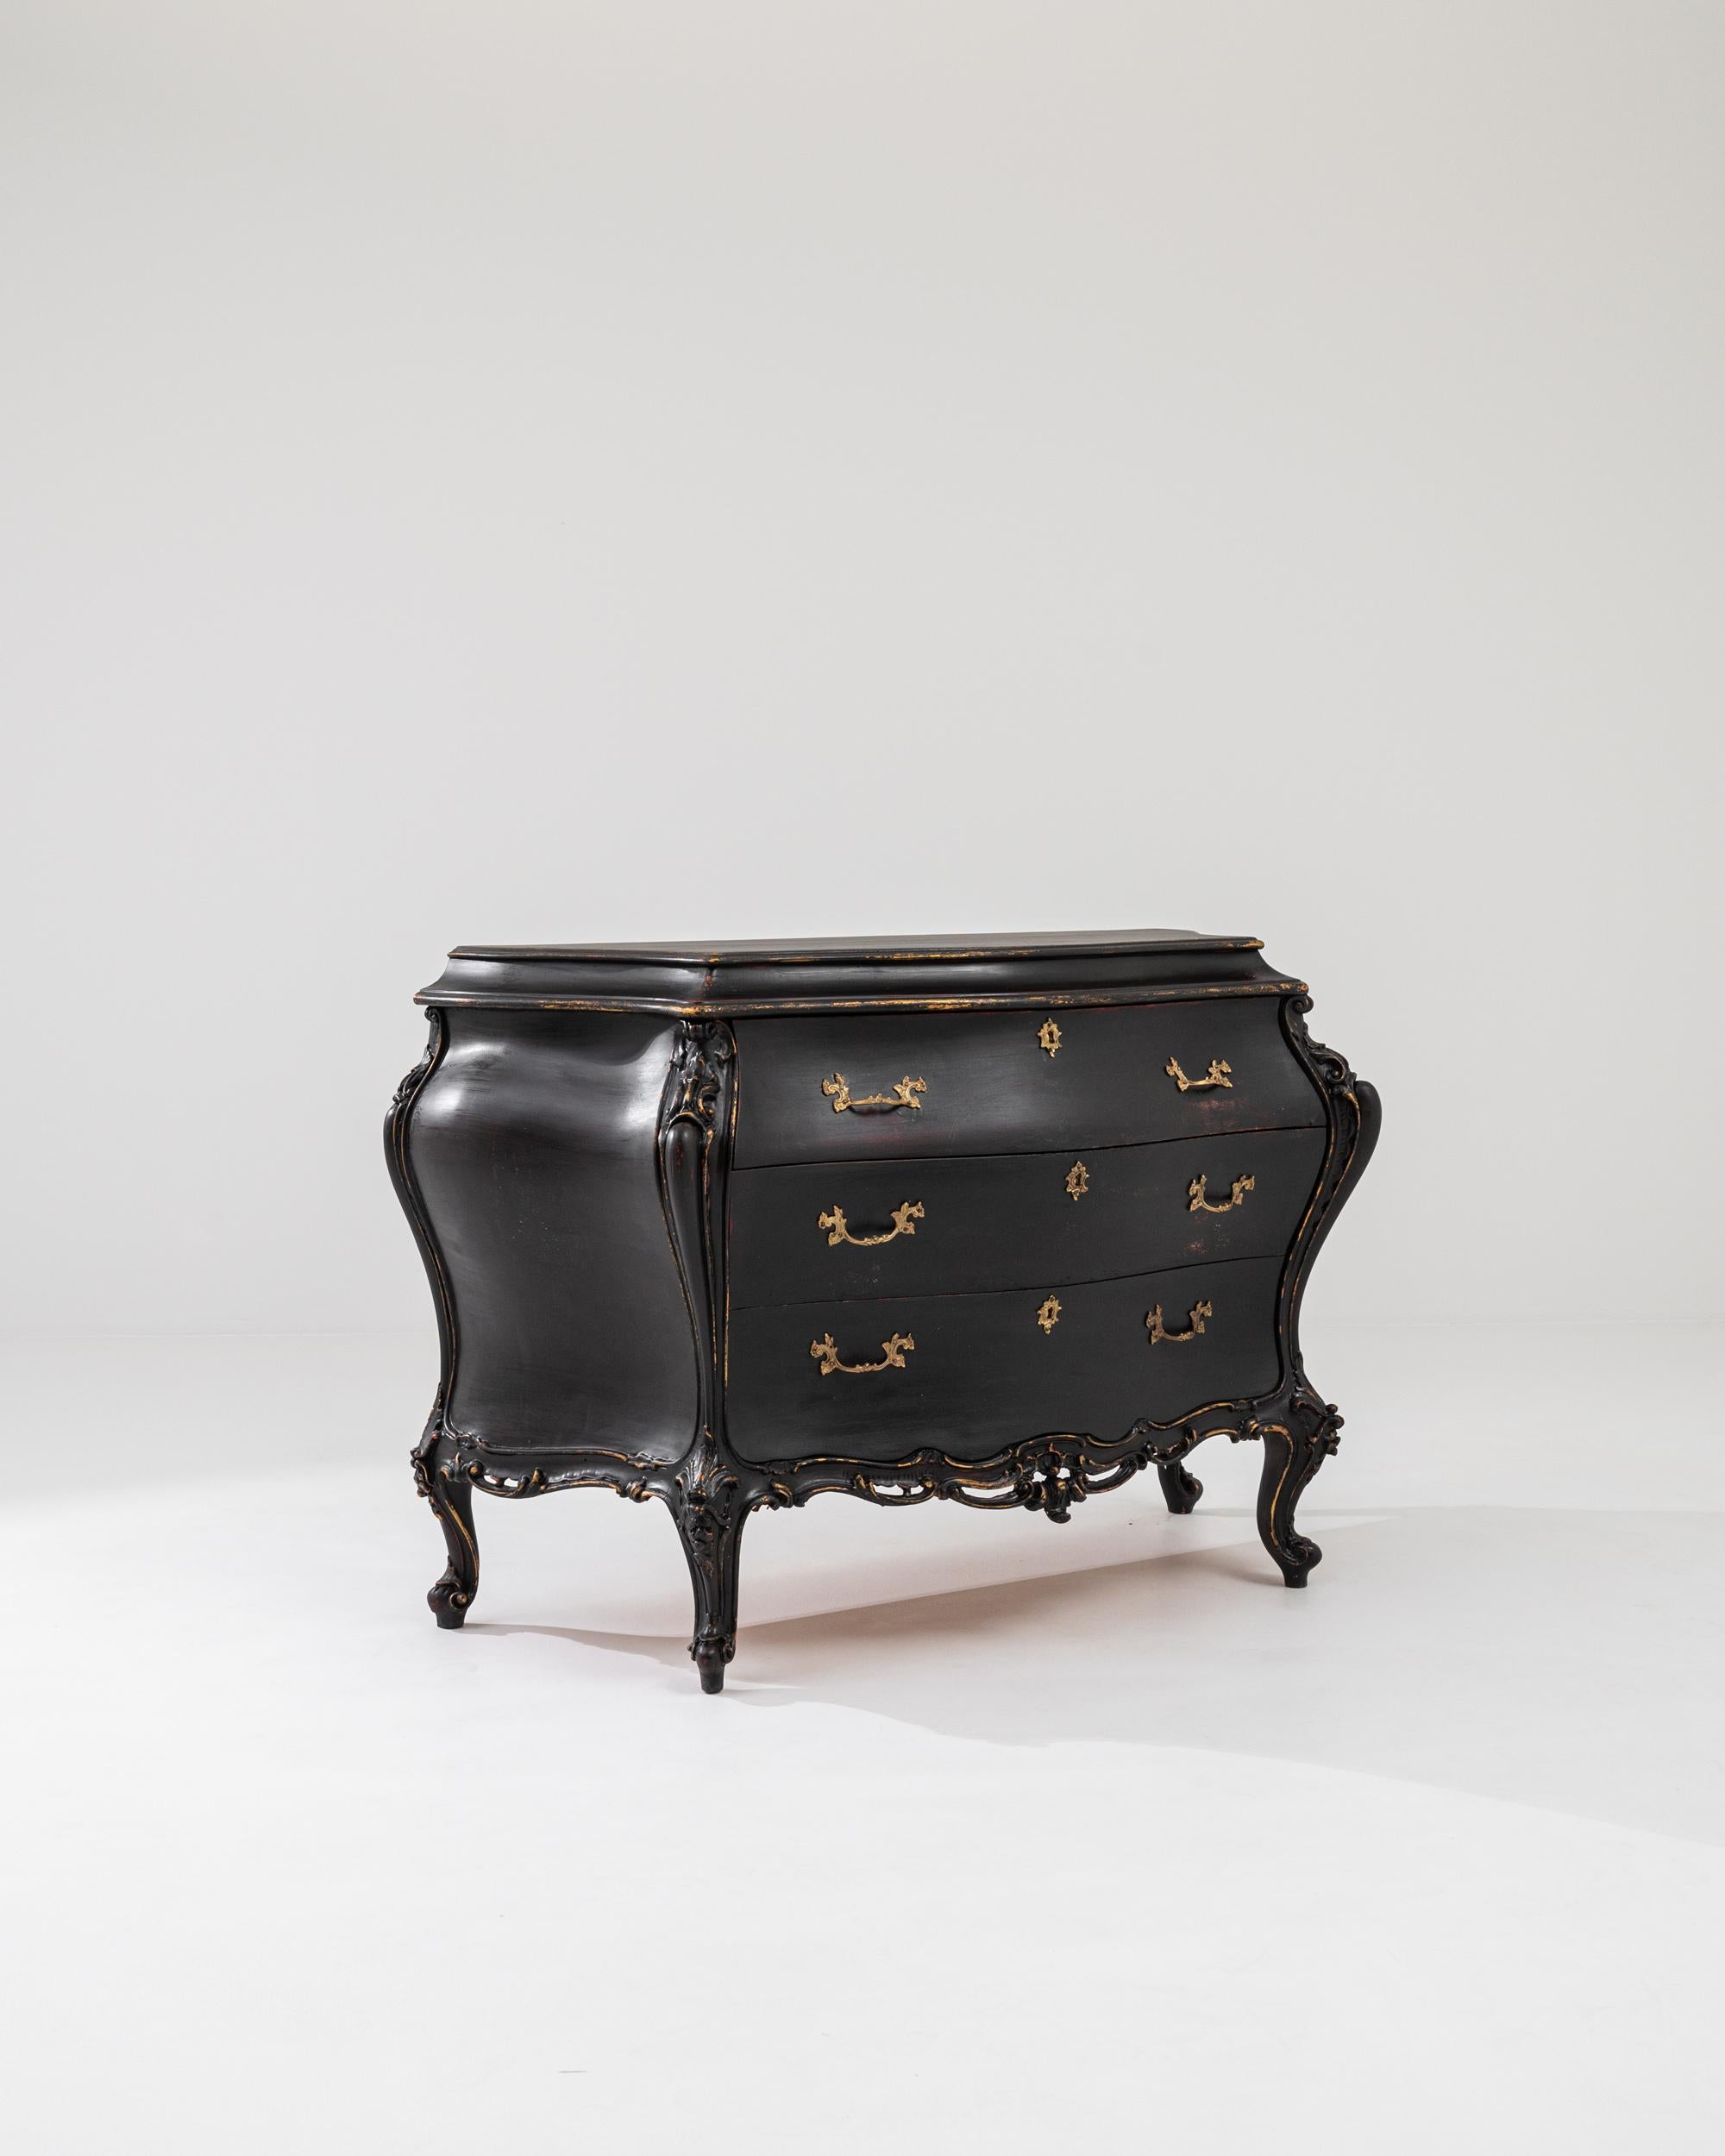 Graceful and ornate, this vintage wooden chest of drawers offers a Rococo fantasy in a somber ebonized finish. Made in Italy in the 20th century, the design takes inspiration from the ostentatious furniture of the Baroque period: the serpentine form